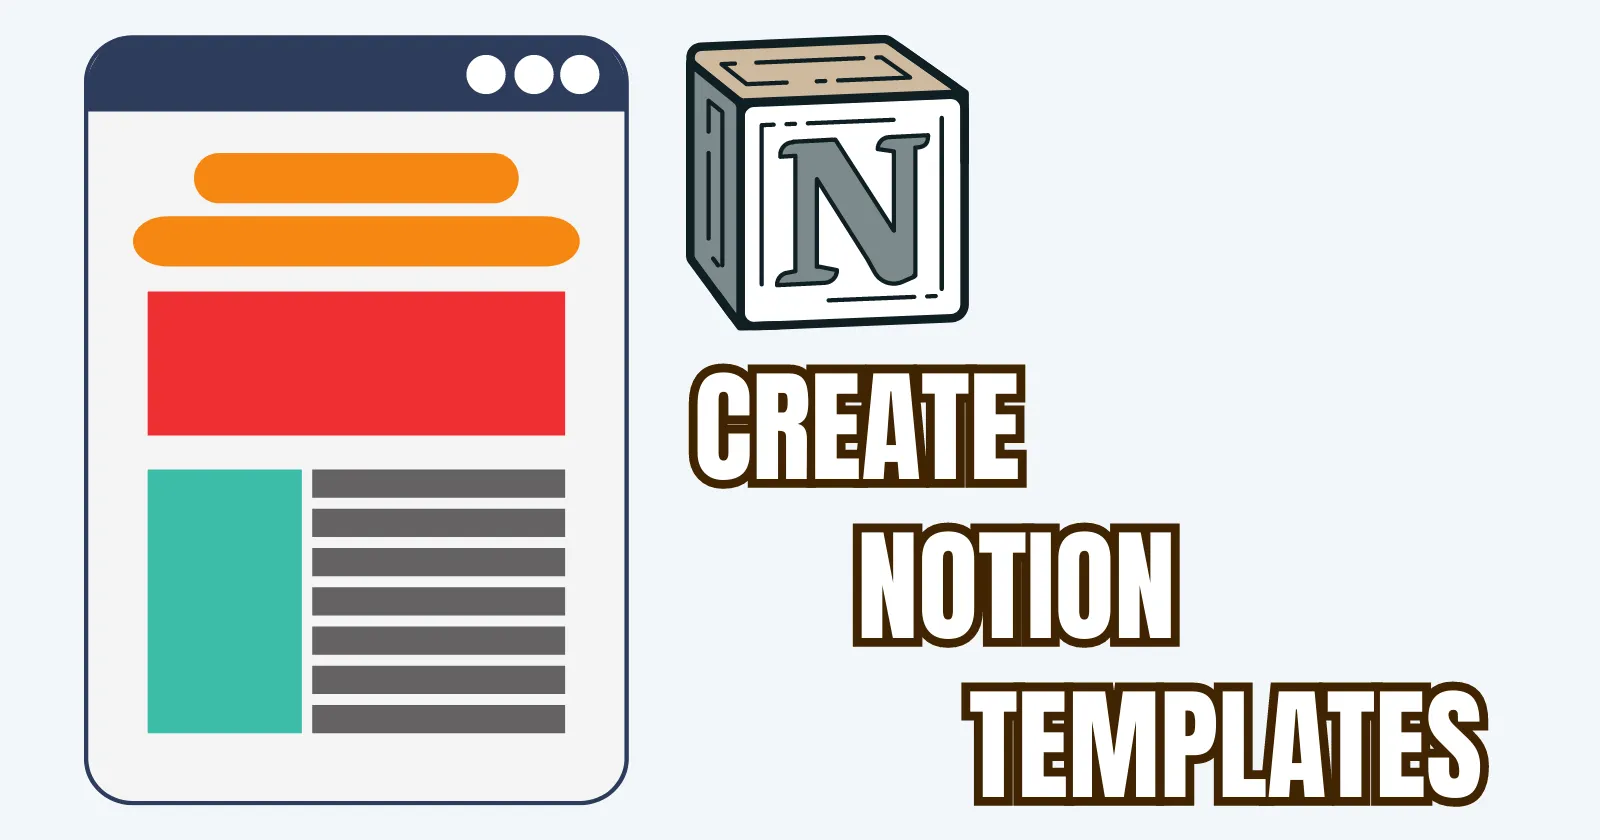 How to Create Notion Templates